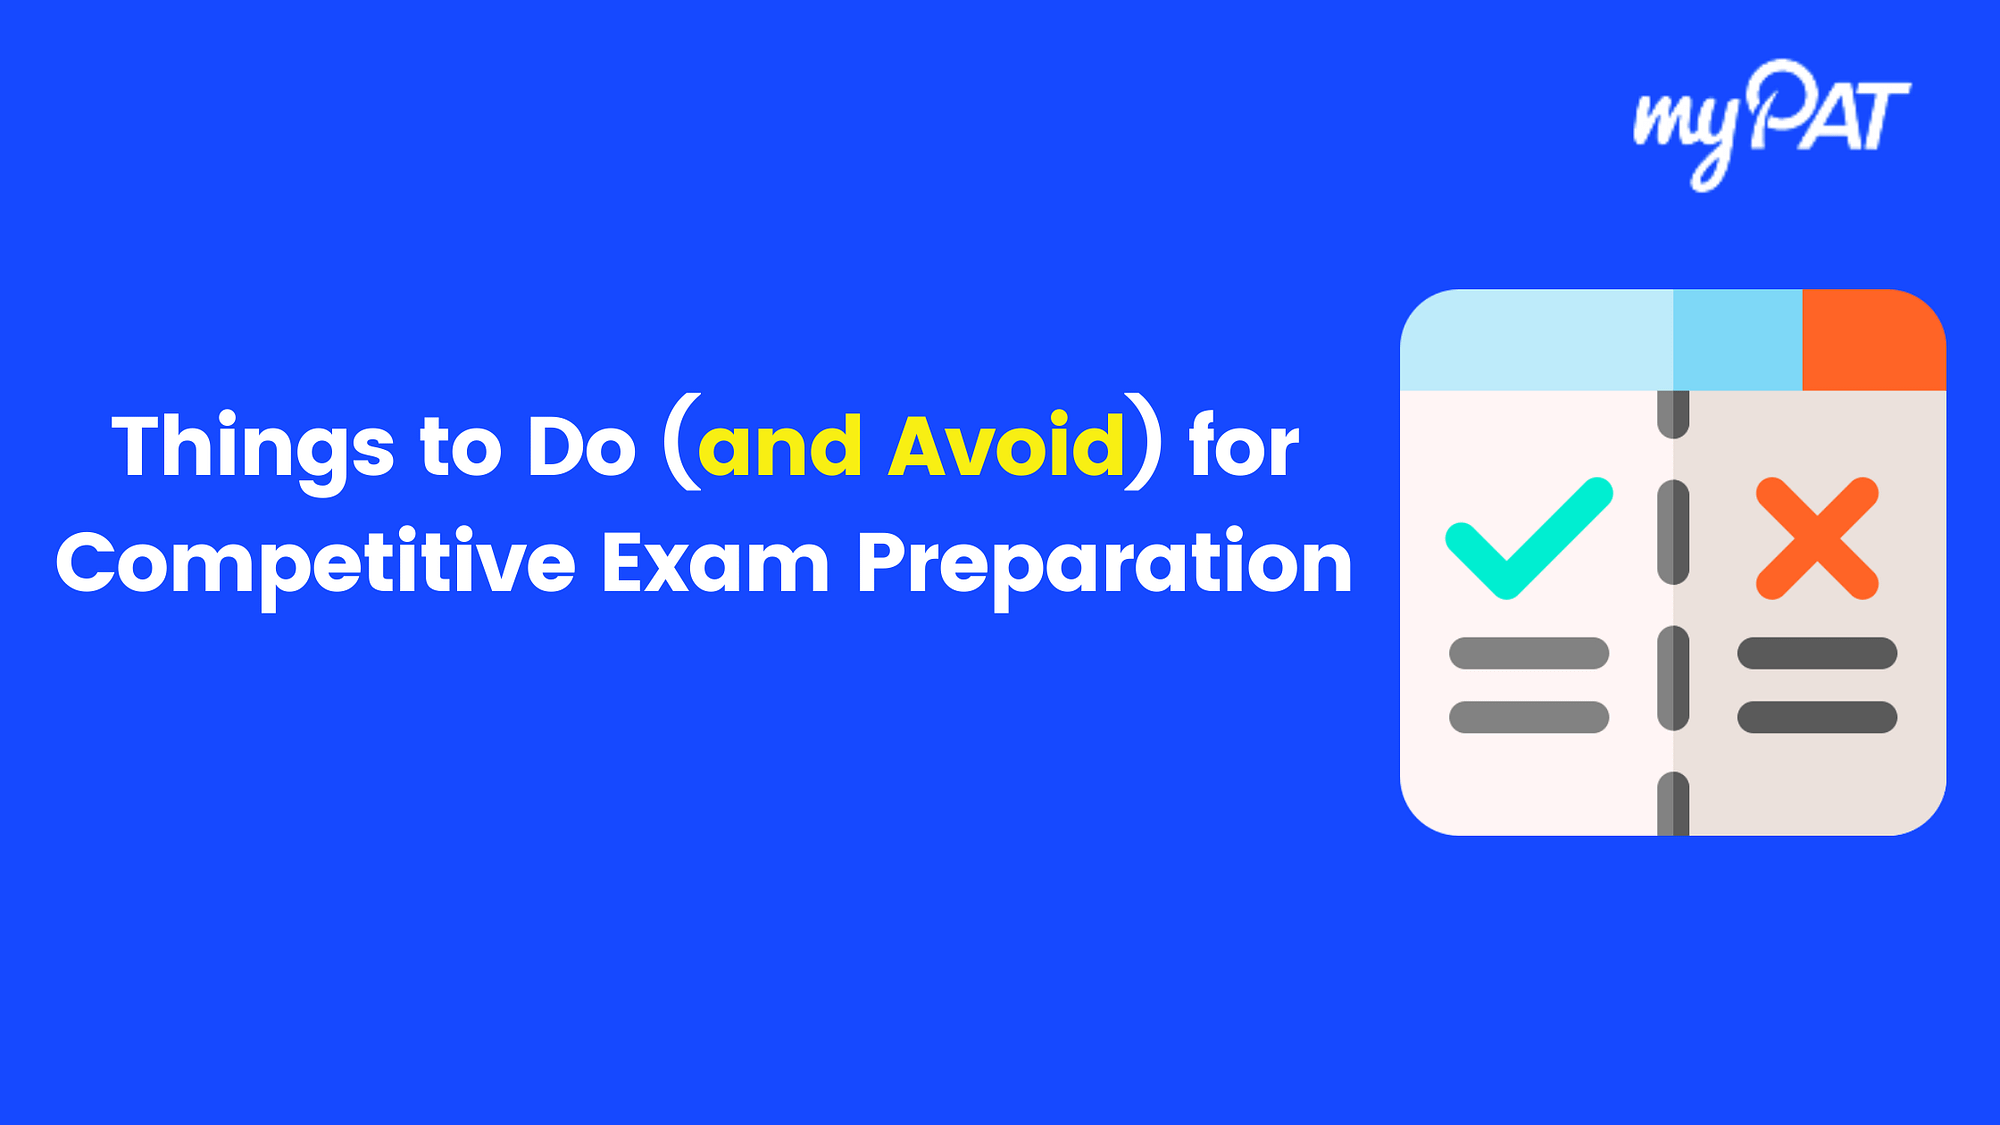 Things to Do (and Avoid) for Competitive Exam Preparation